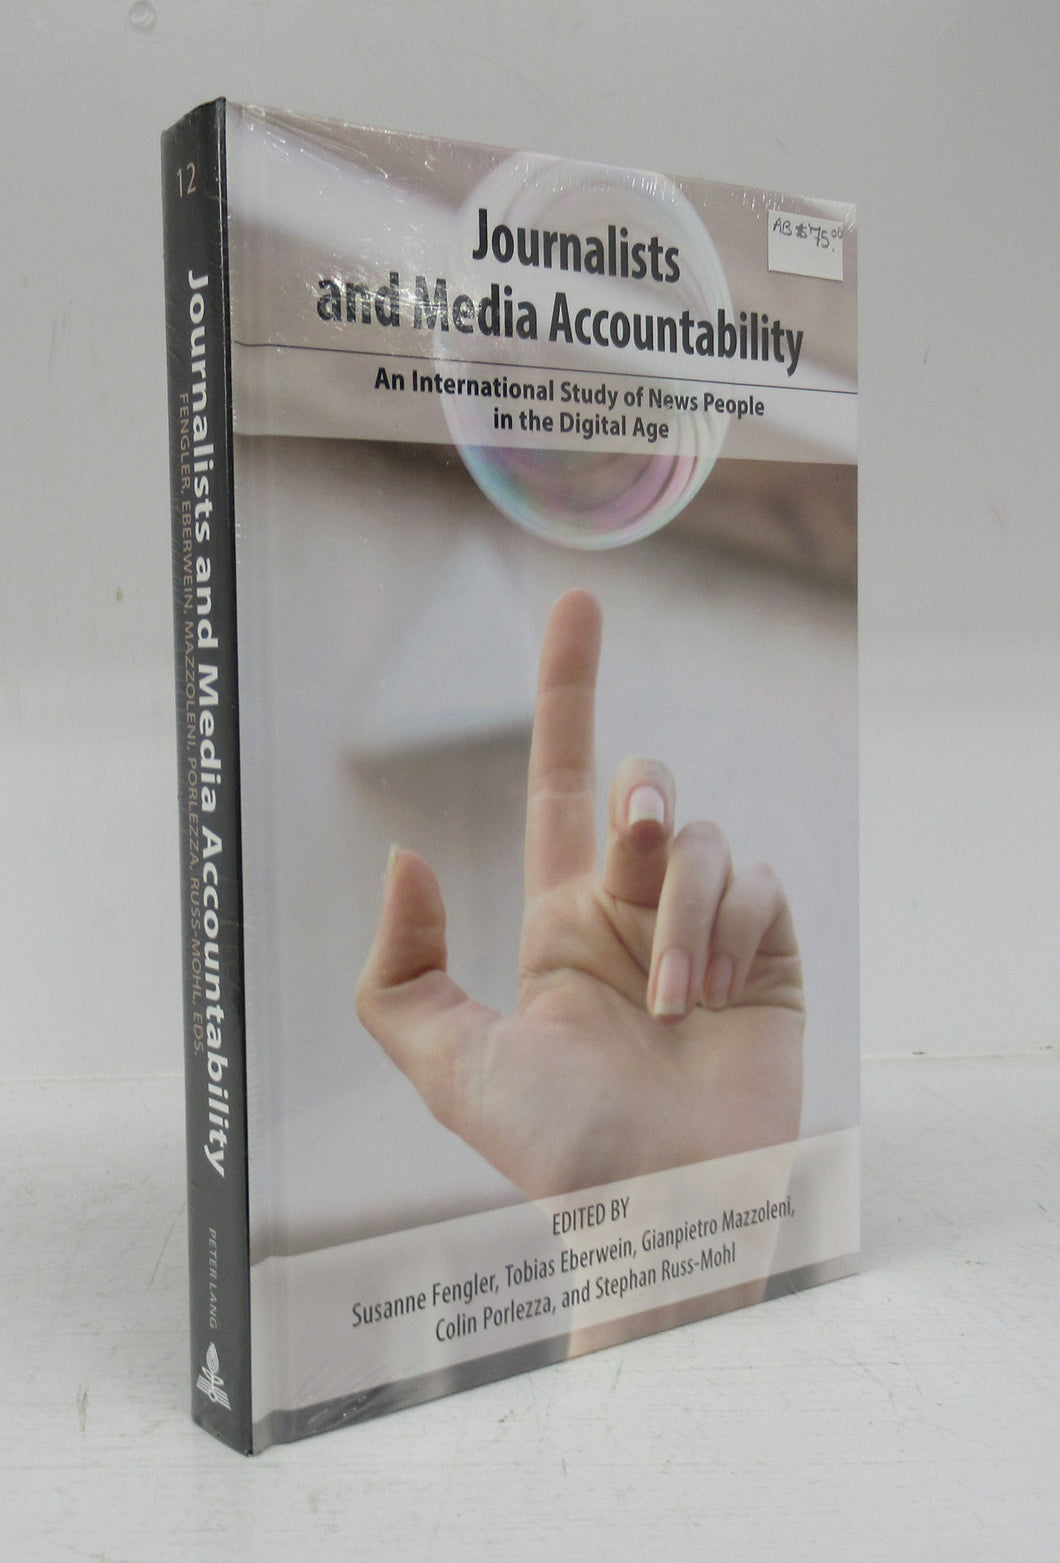 Journalists and Media Accountability: An International Study of New People in the Digital Age